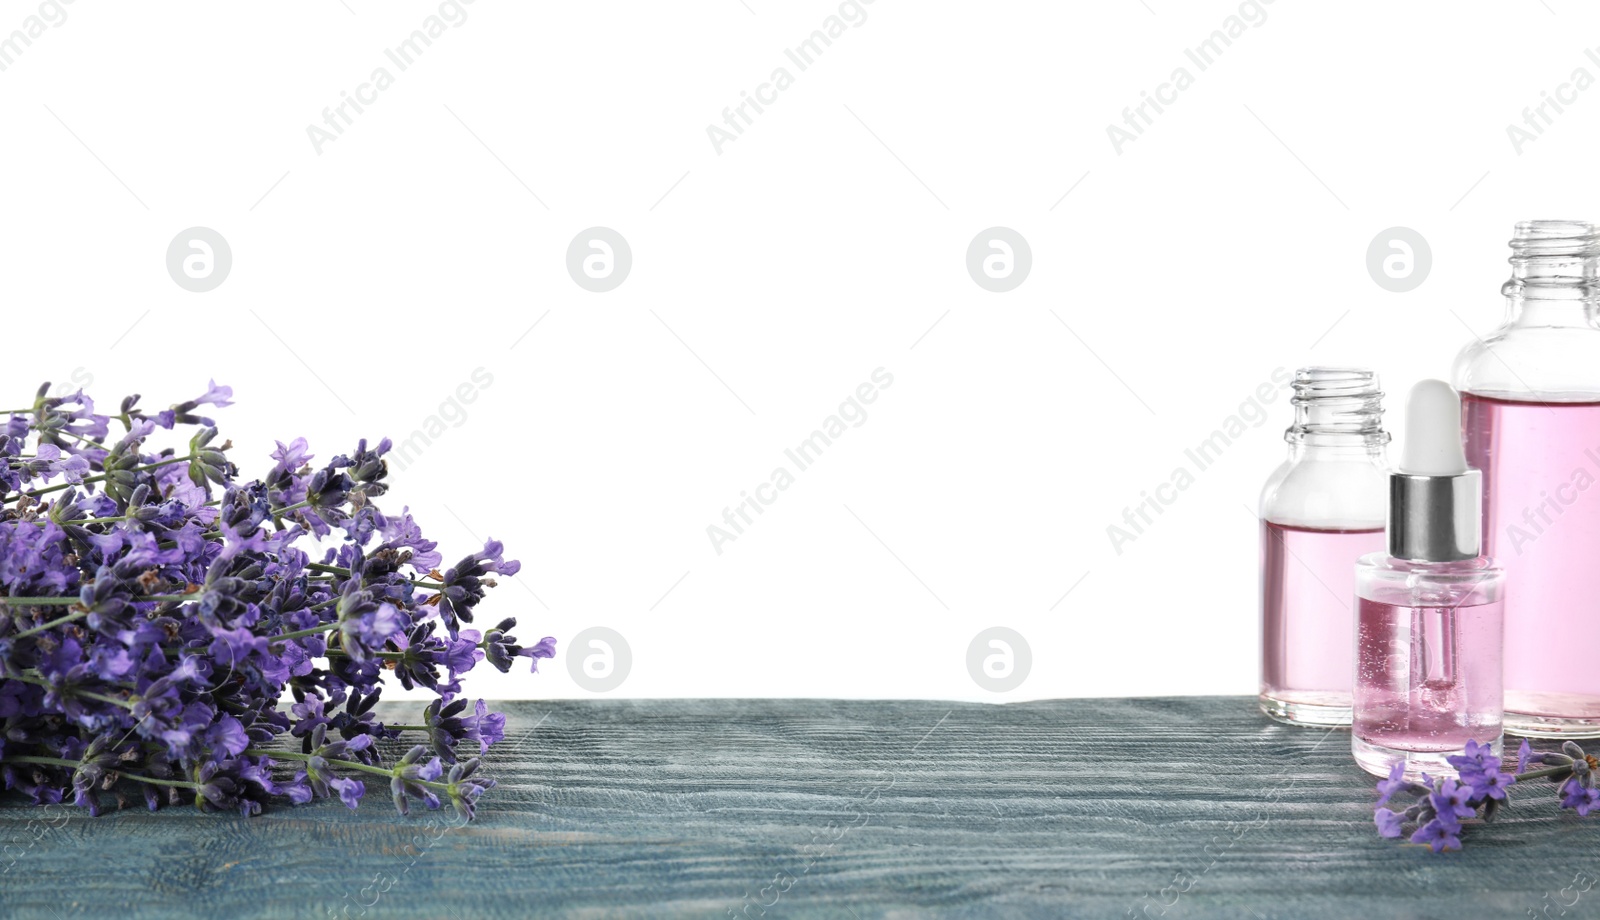 Photo of Bottles of essential oil and lavender flowers on blue wooden table against white background